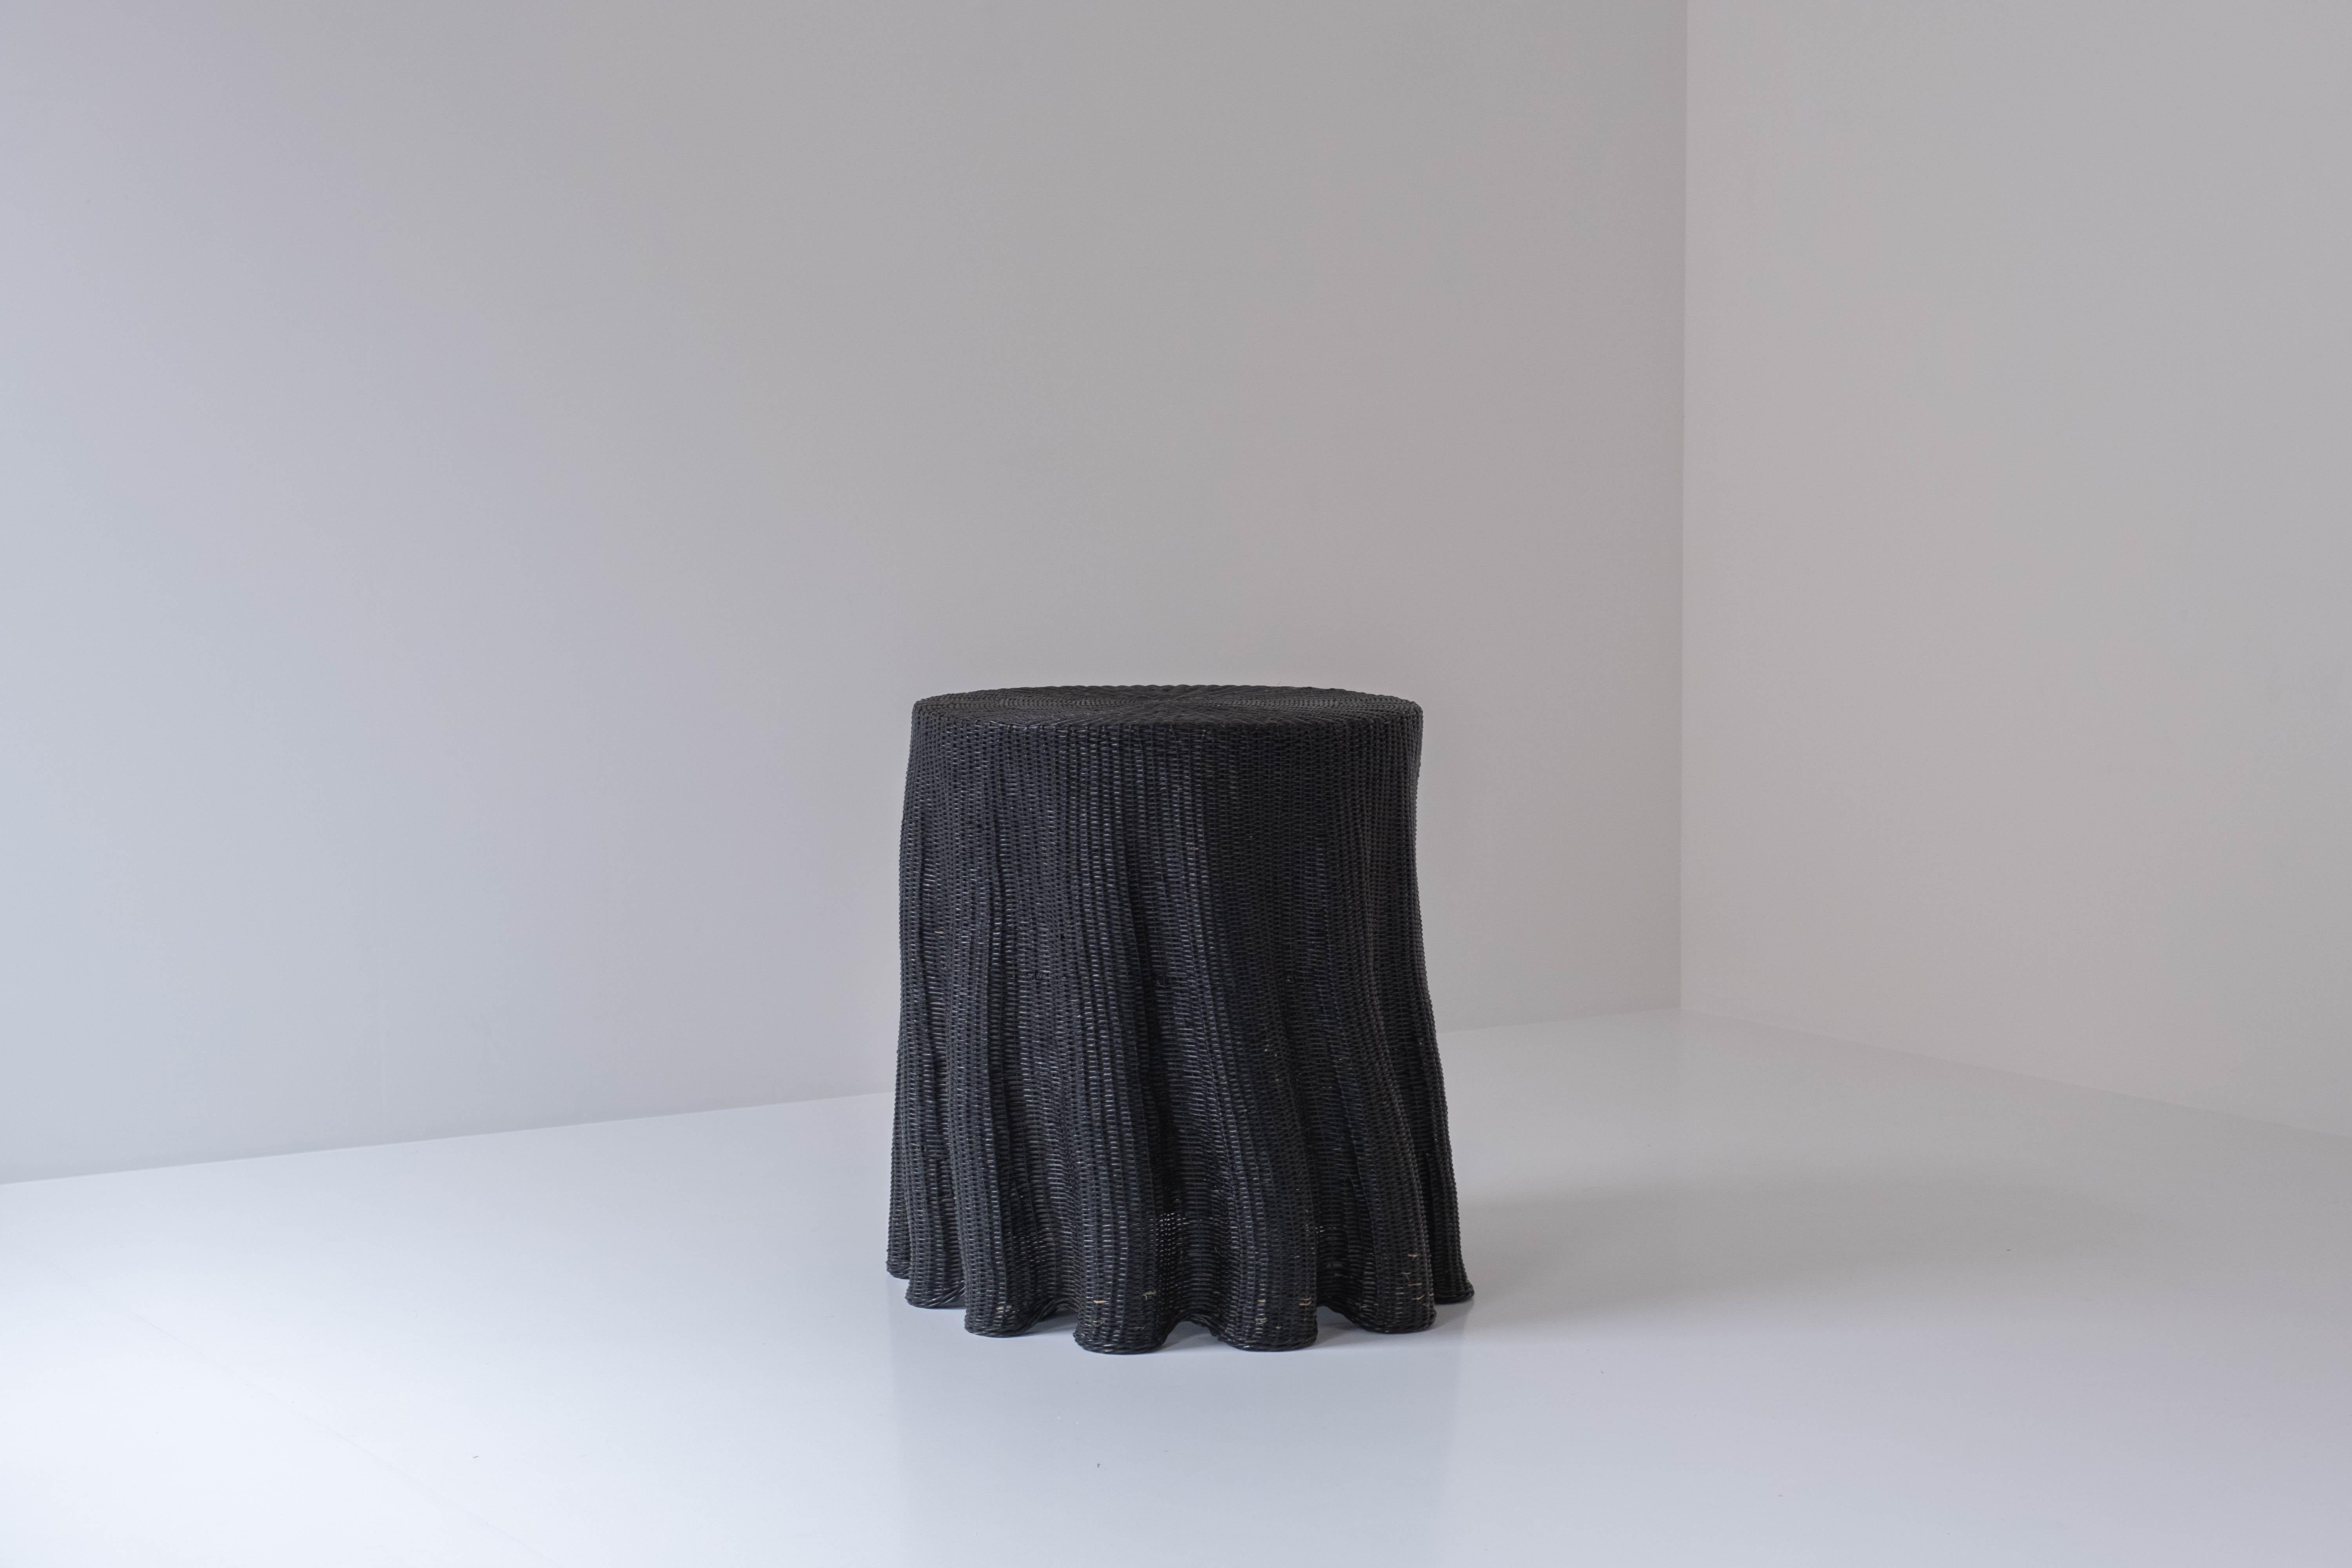 Mid-Century Modern Trompe L’oeil Wicker Side Table with ‘Draped’ Illusion from France, 1970s